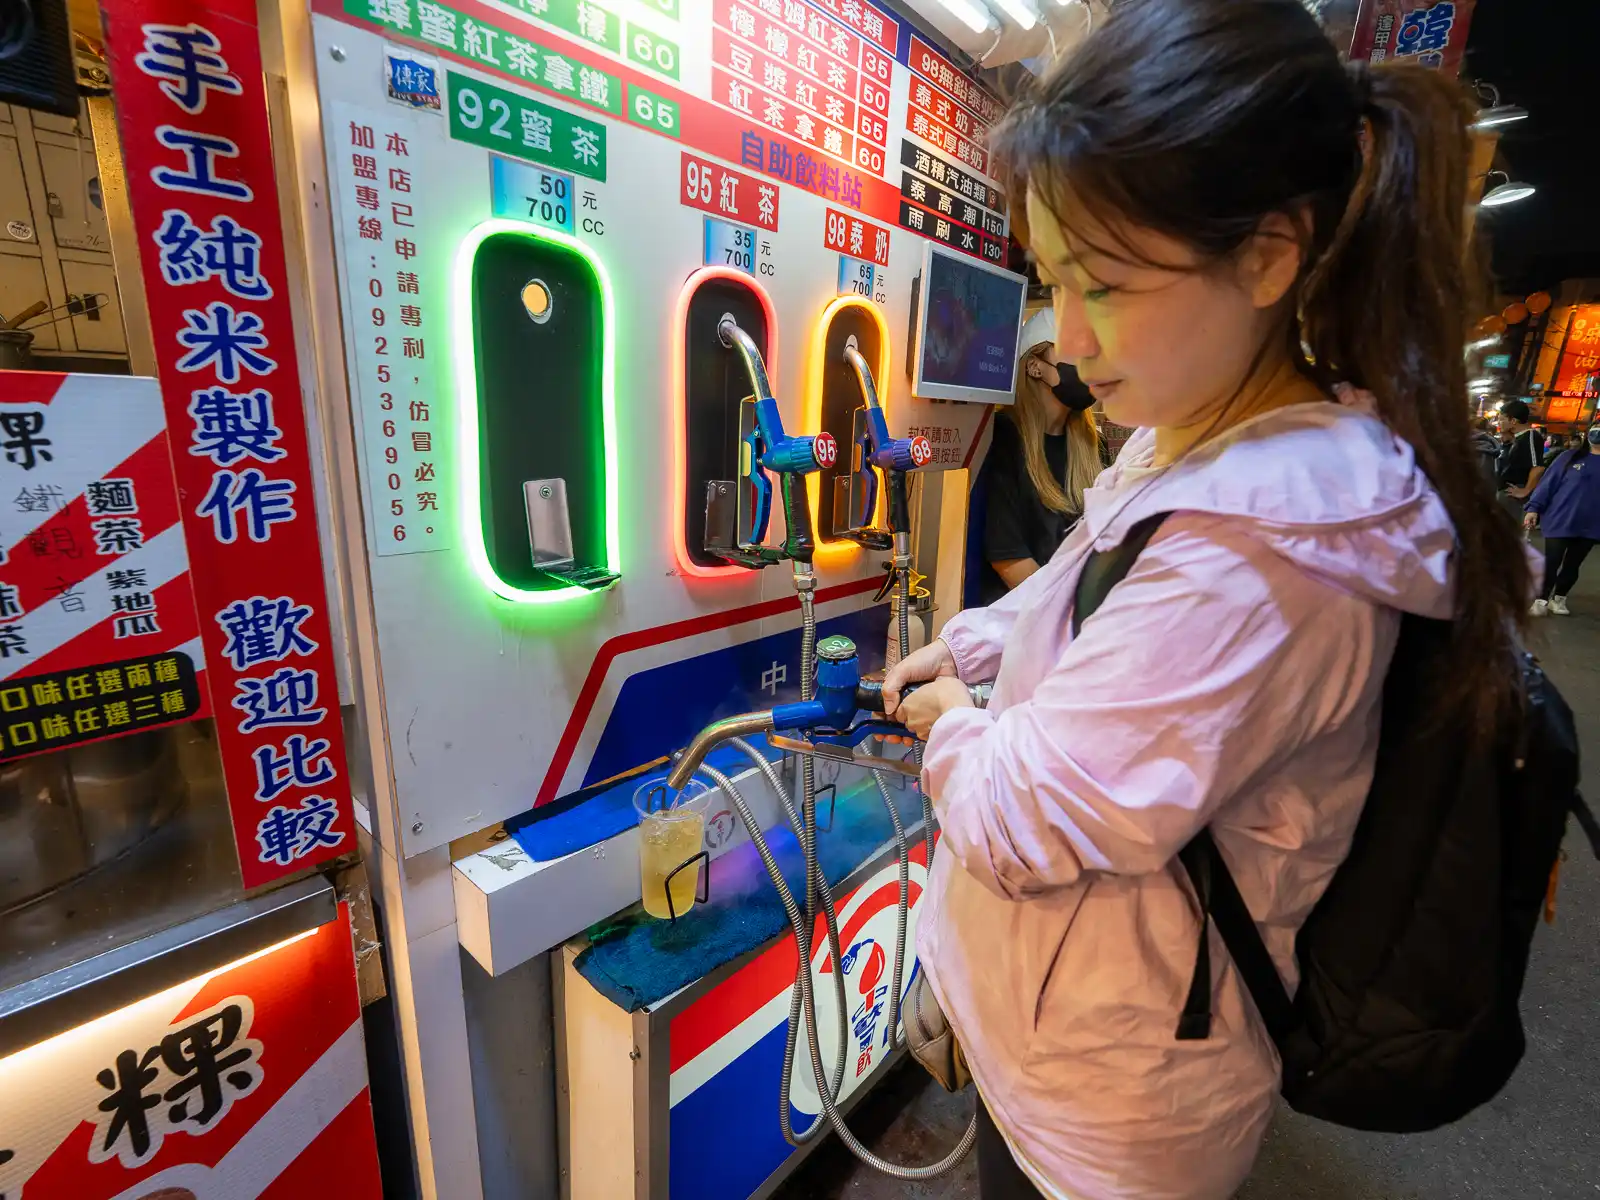 A self-serve refreshment dispenser in the form of a fuel pump in Feng Chia Night Market.